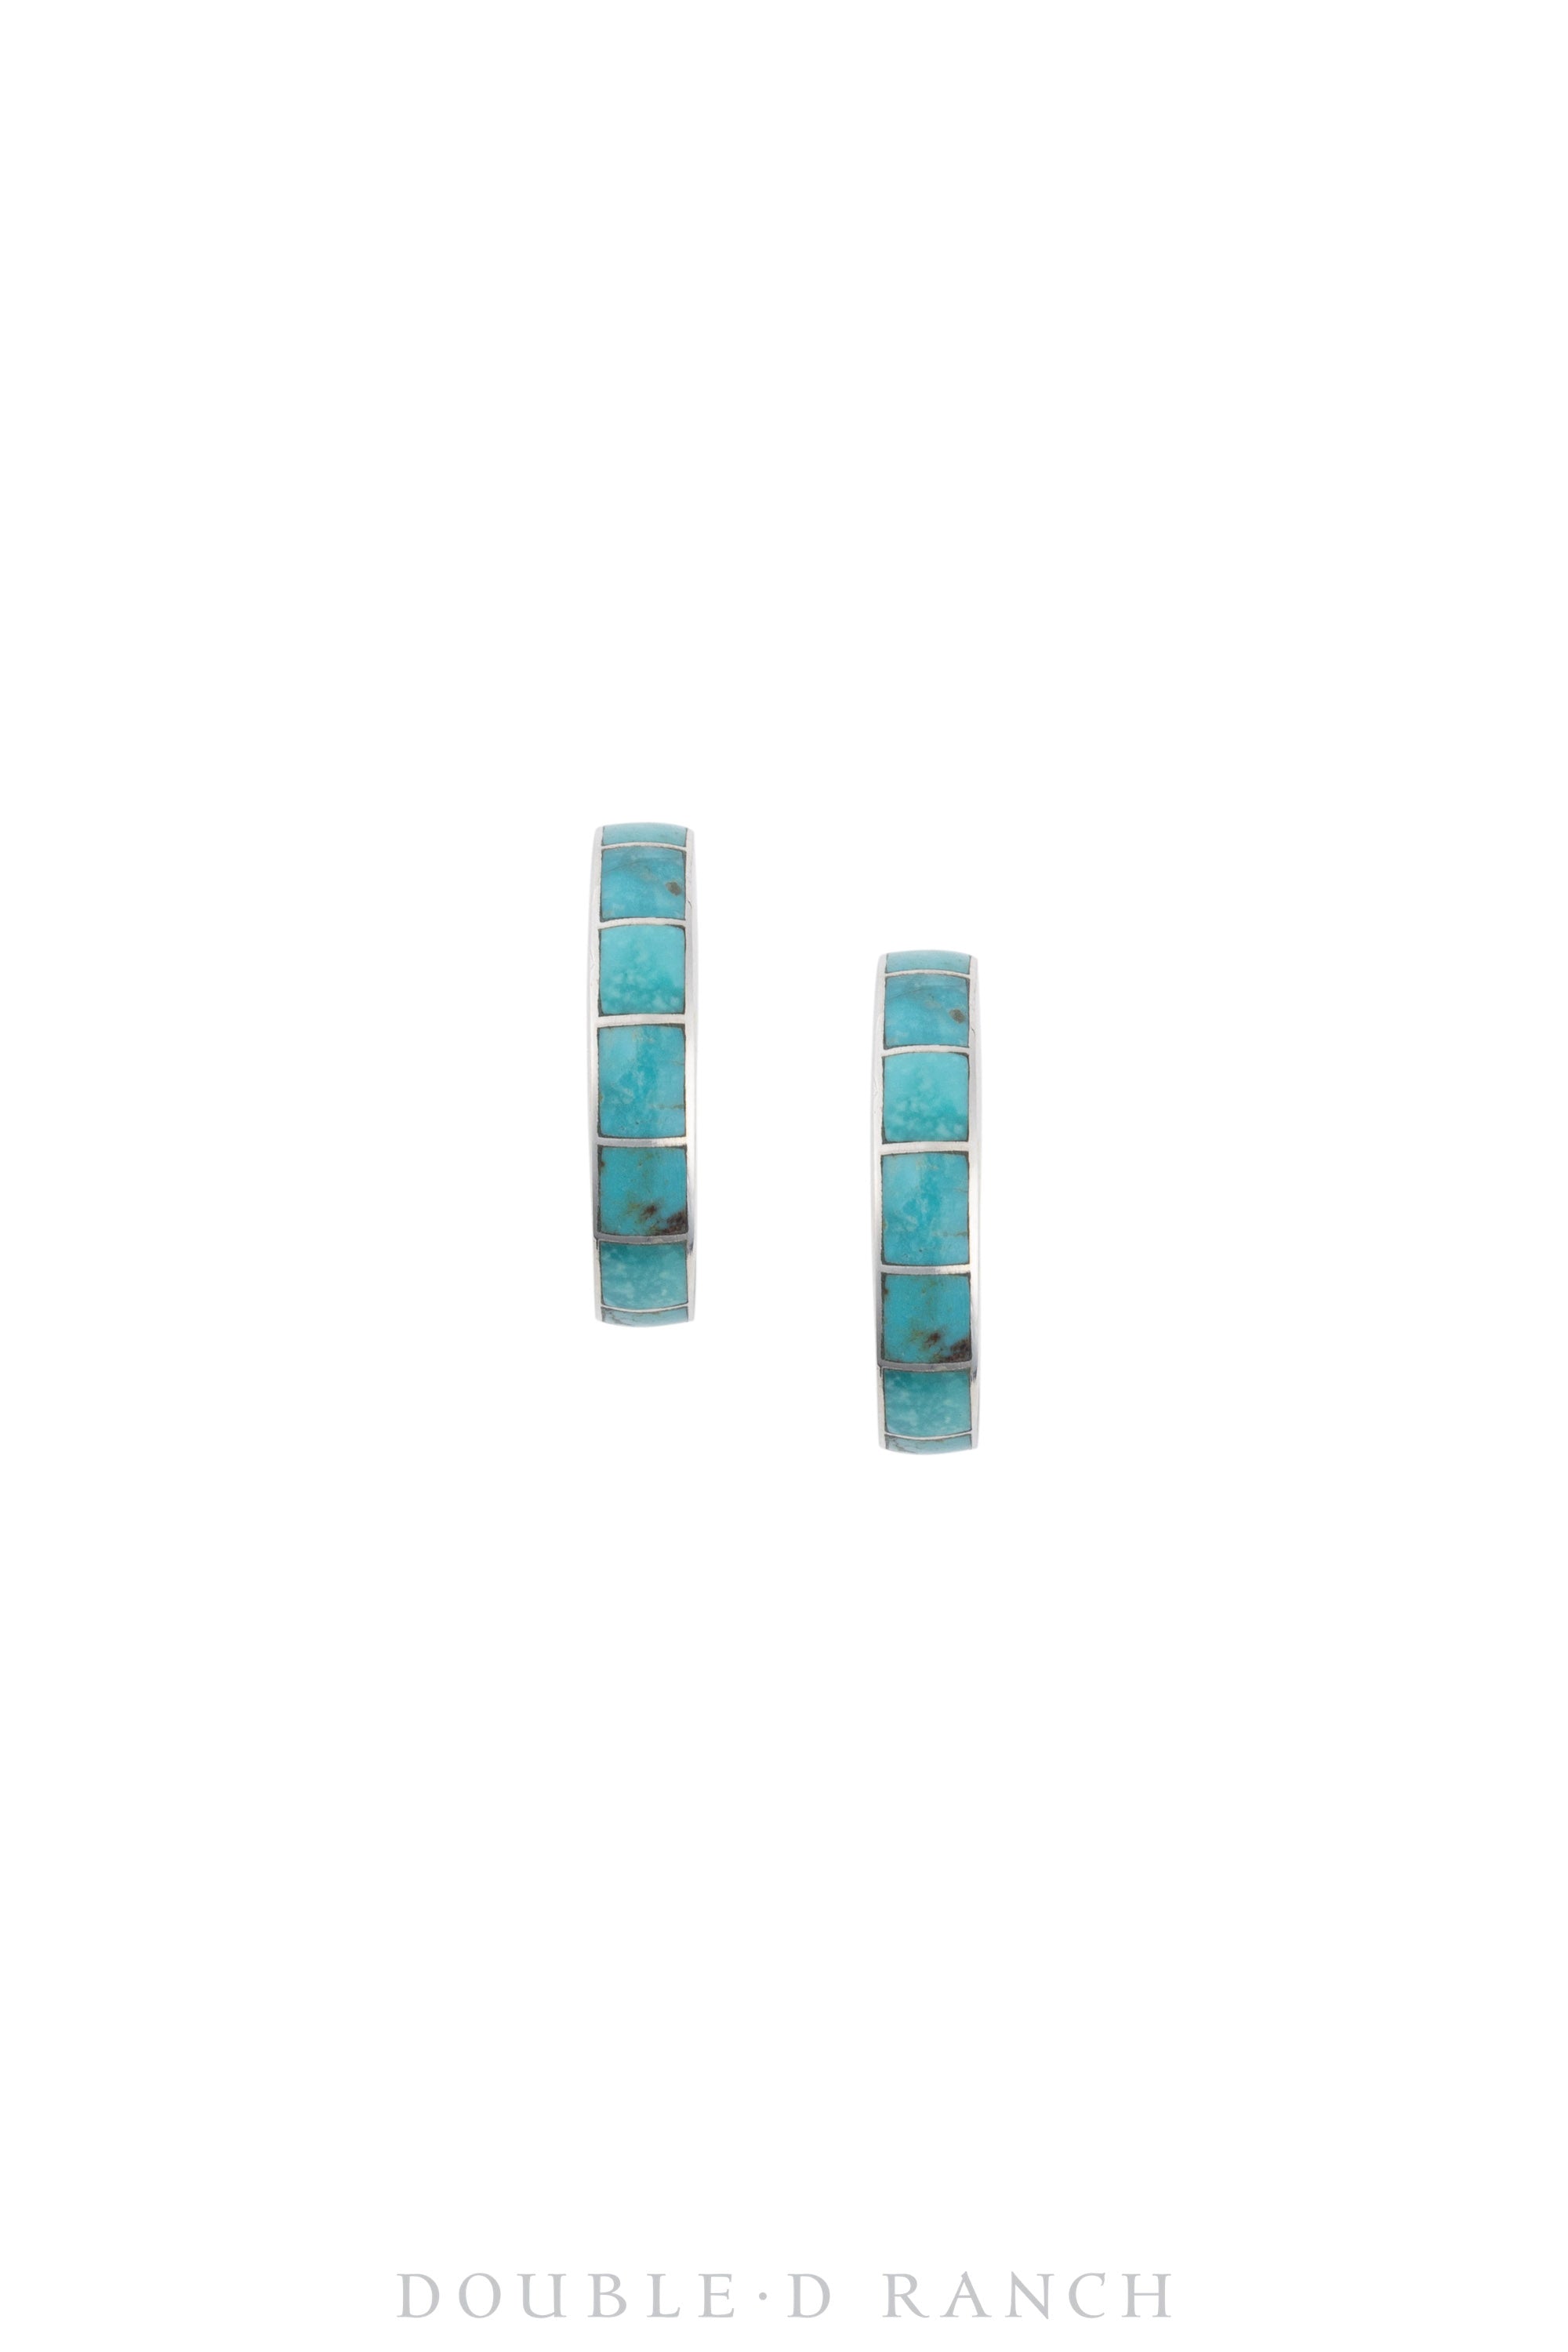 Earrings, Hoop, Turquoise, Inlay, Contemporary, 1520